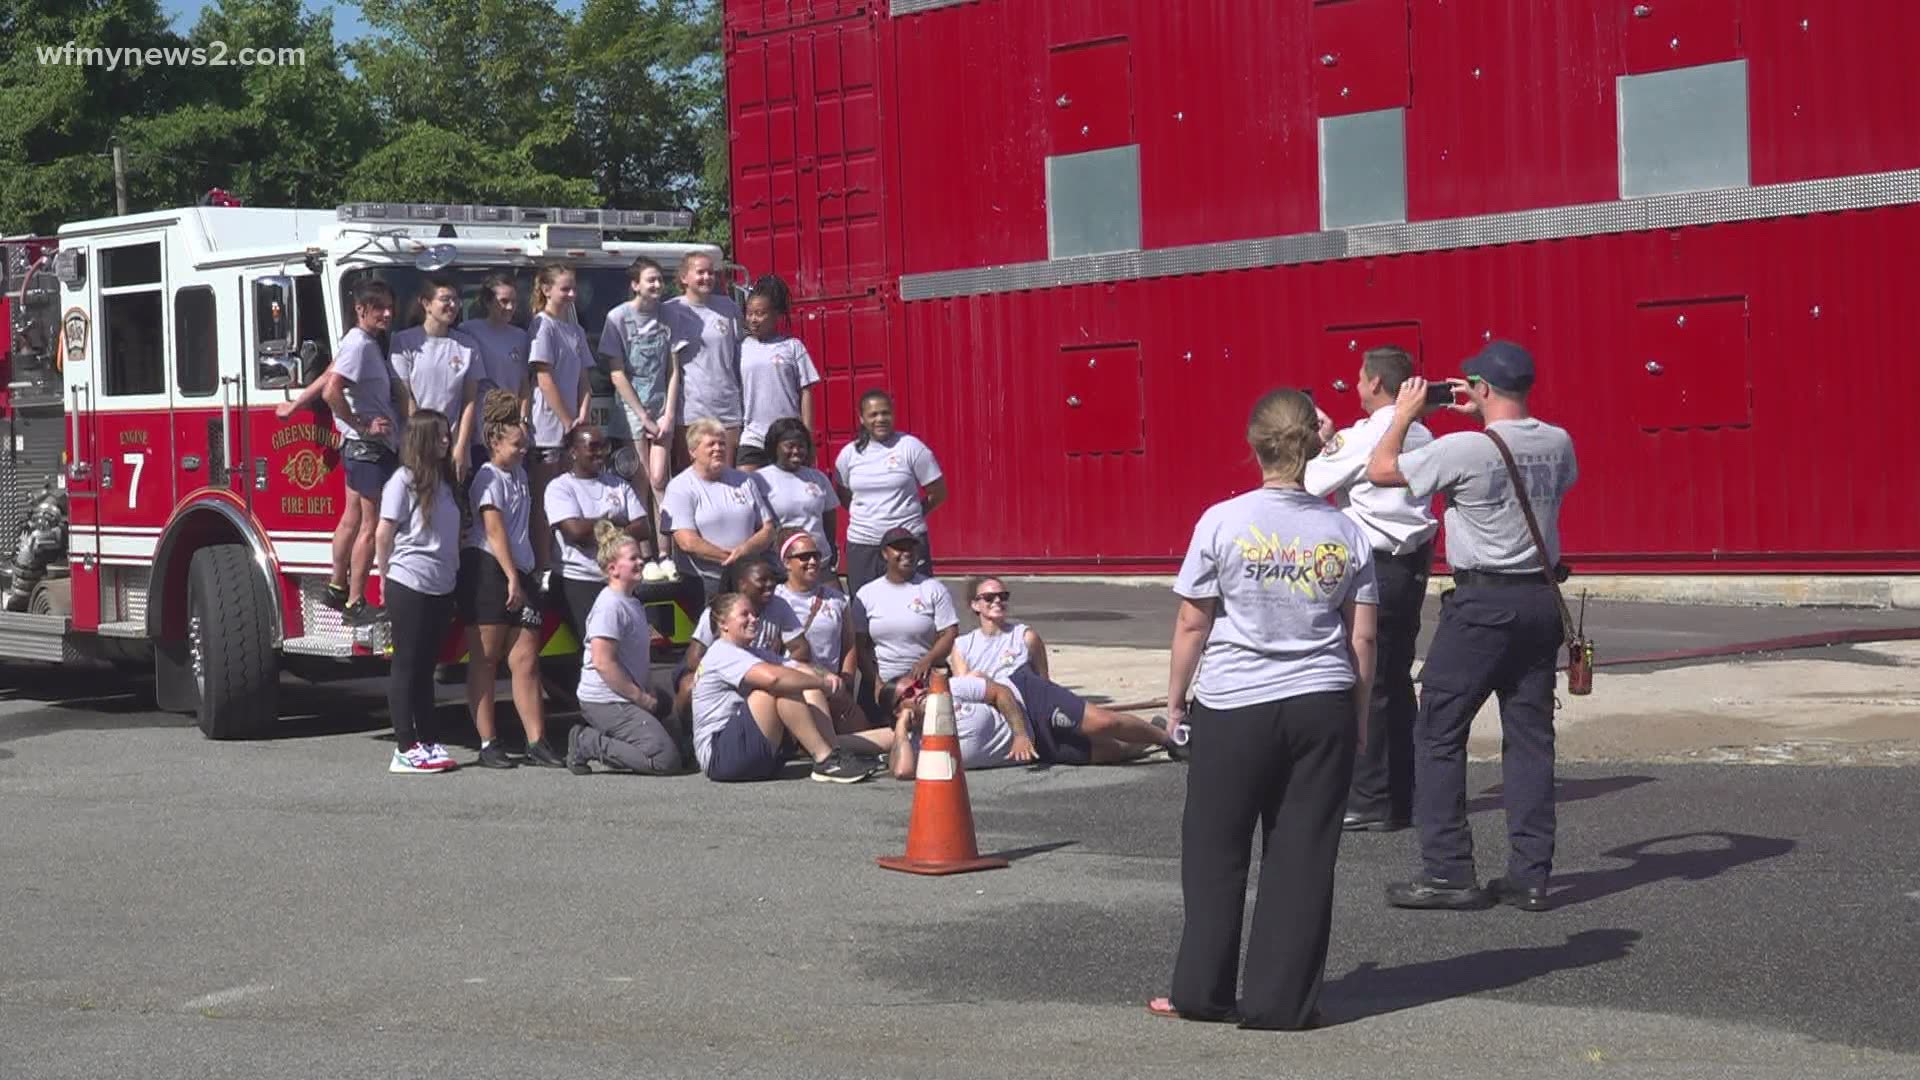 The four day camp is aimed at recruiting female teens into a career as a first responders.